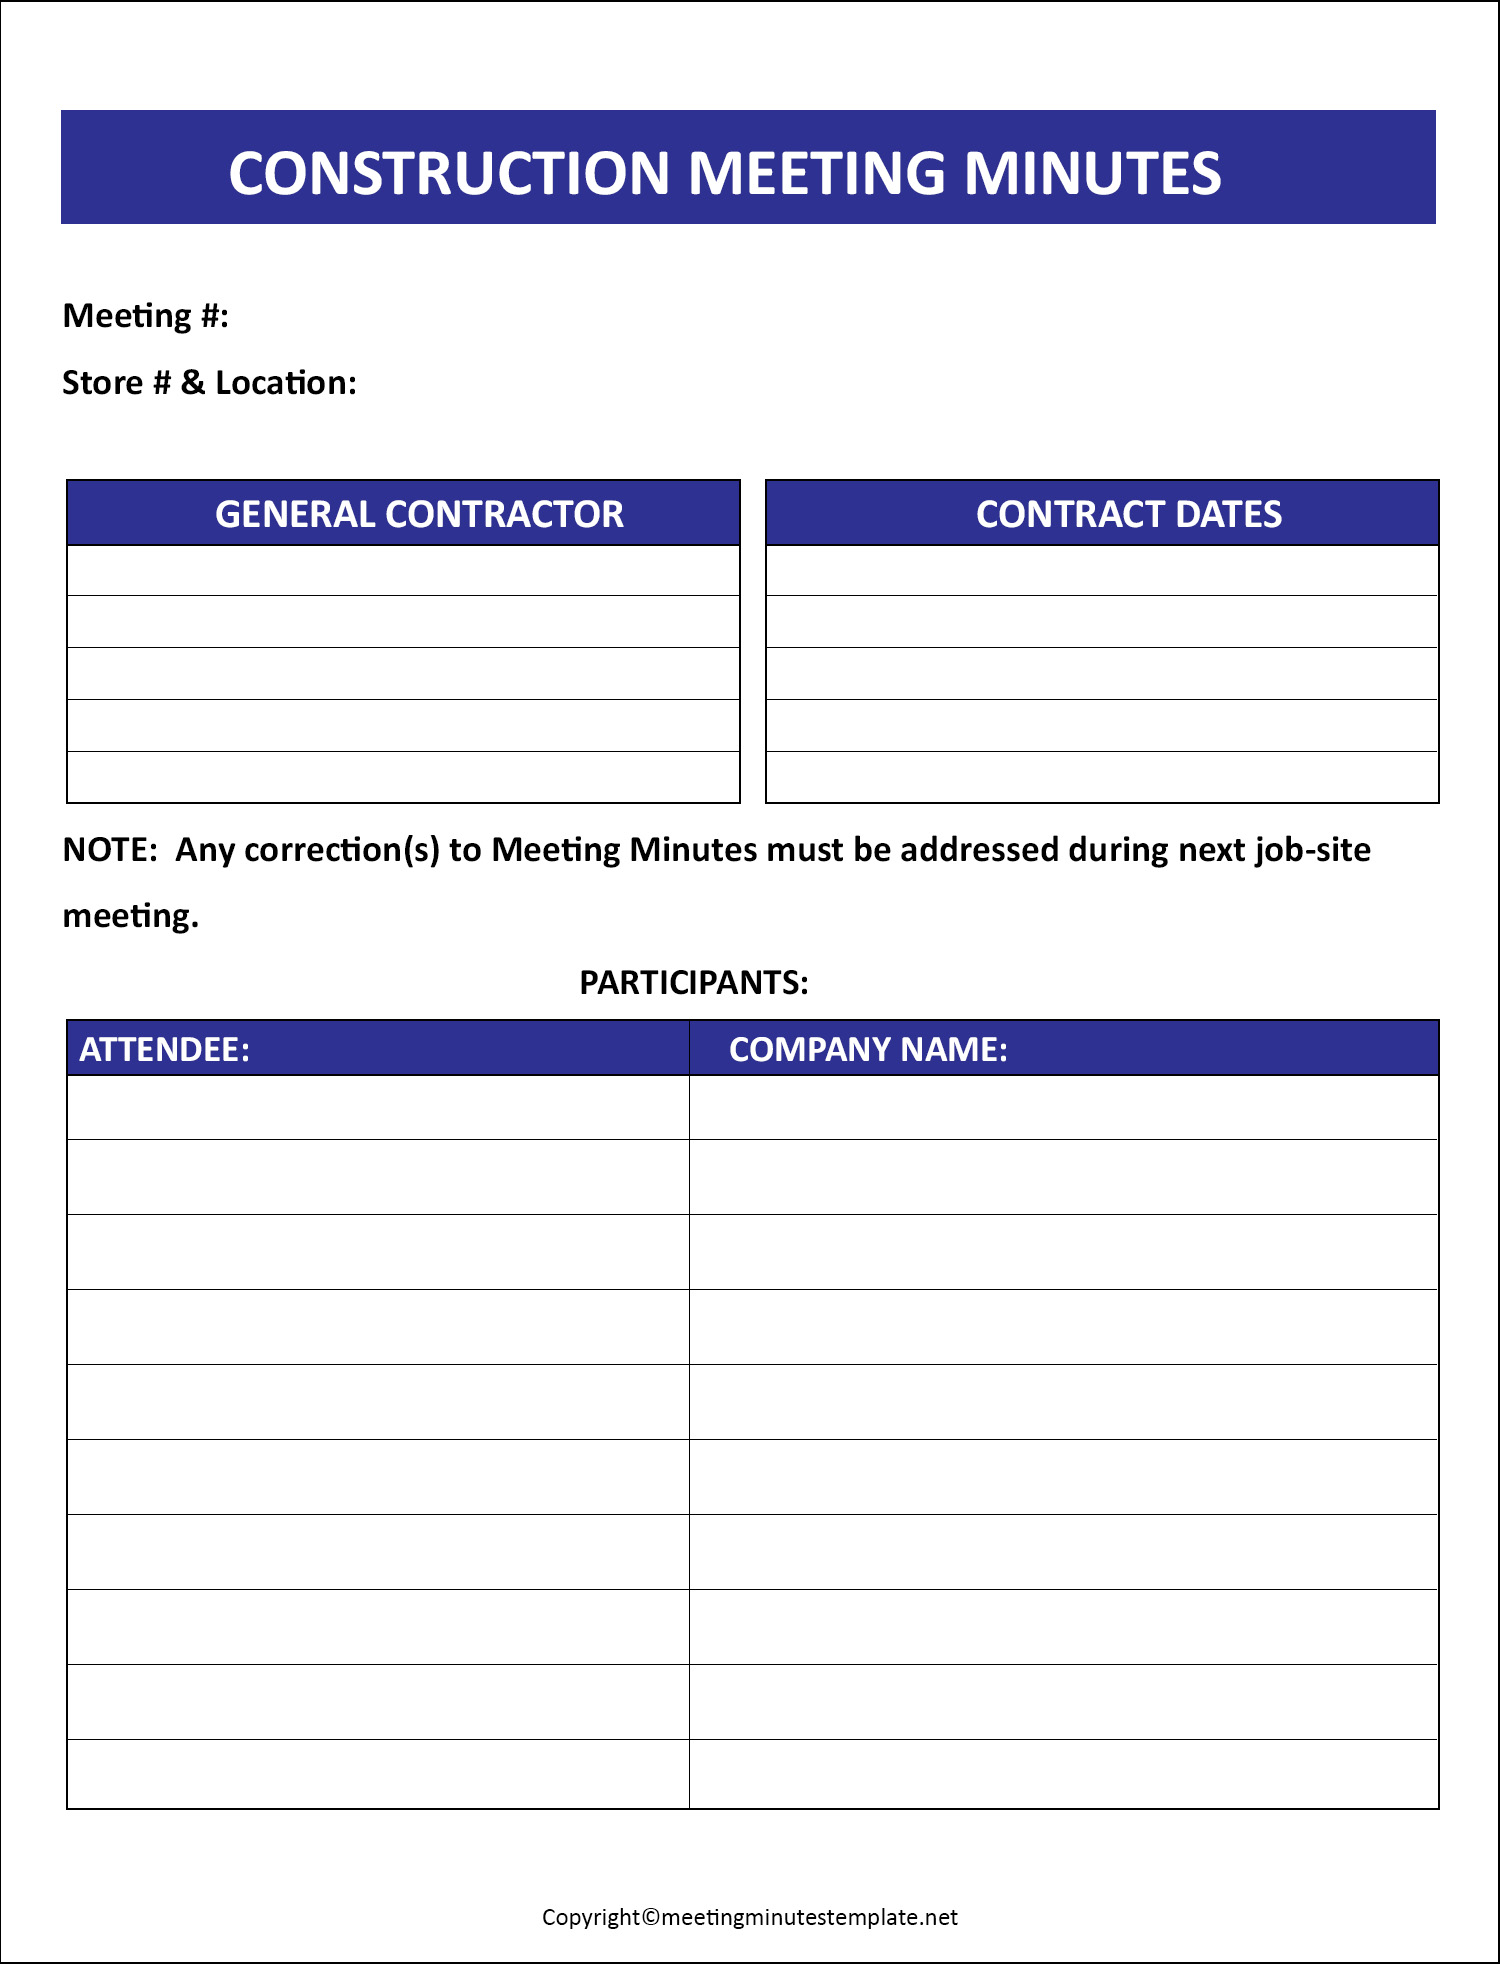 Construction Meeting Minutes Template Excel